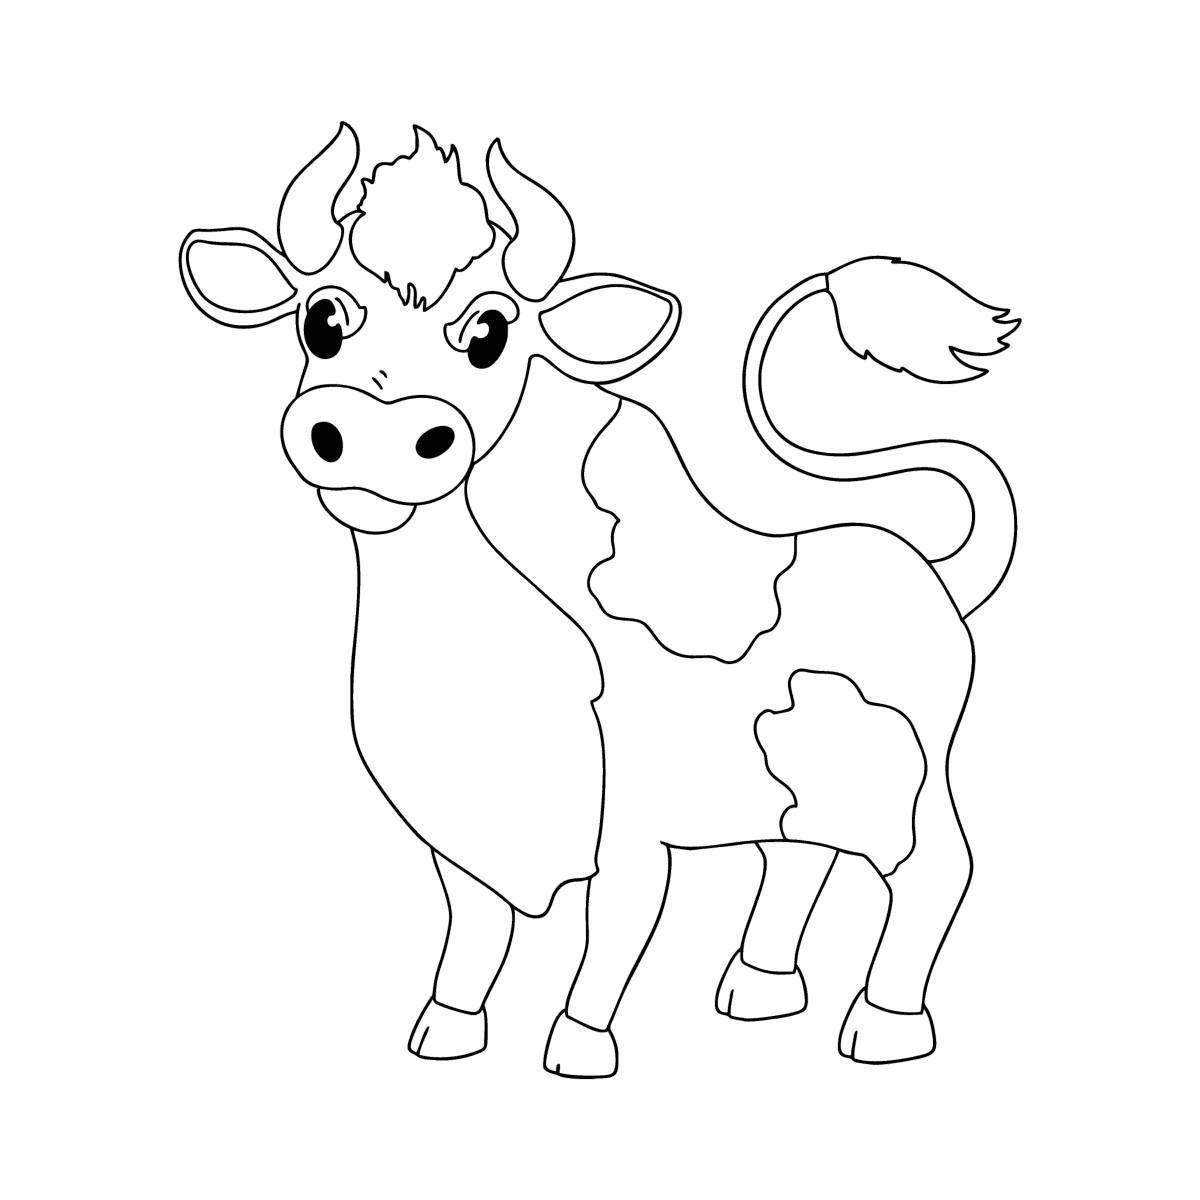 Fancy cow coloring book for 3-4 year olds